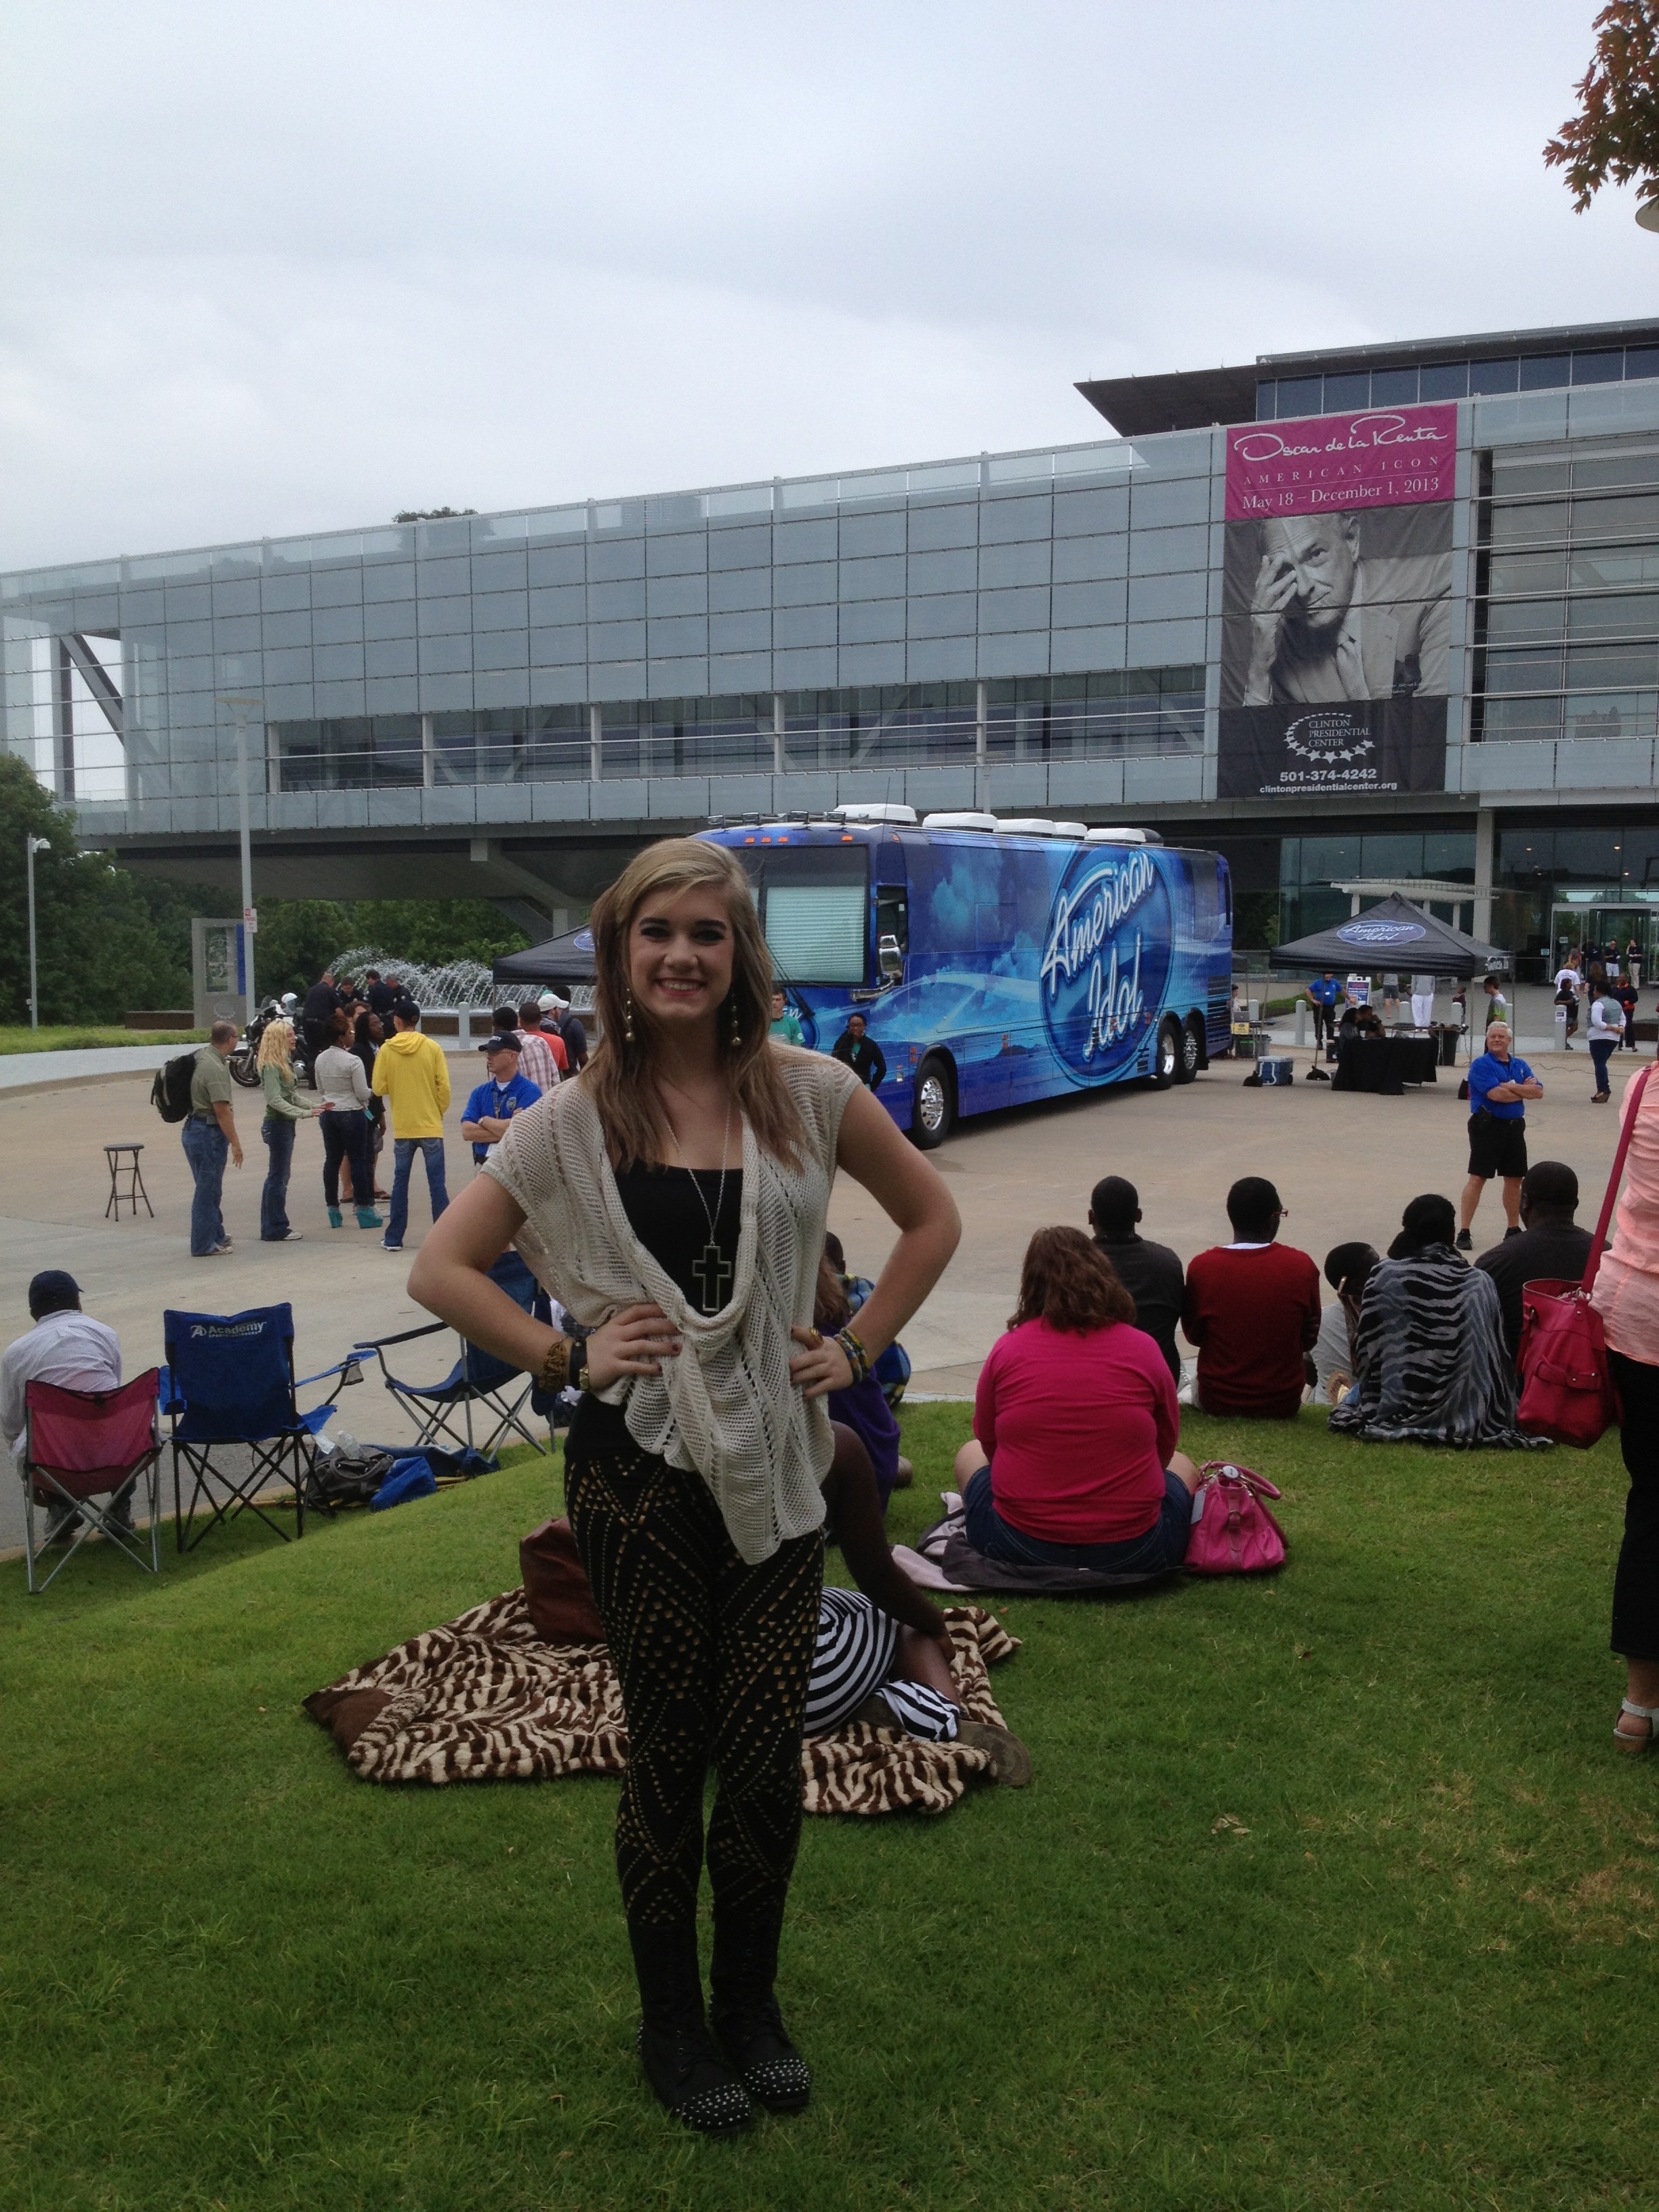 Audition bus in Little Rock, AR for the first round of American Idol